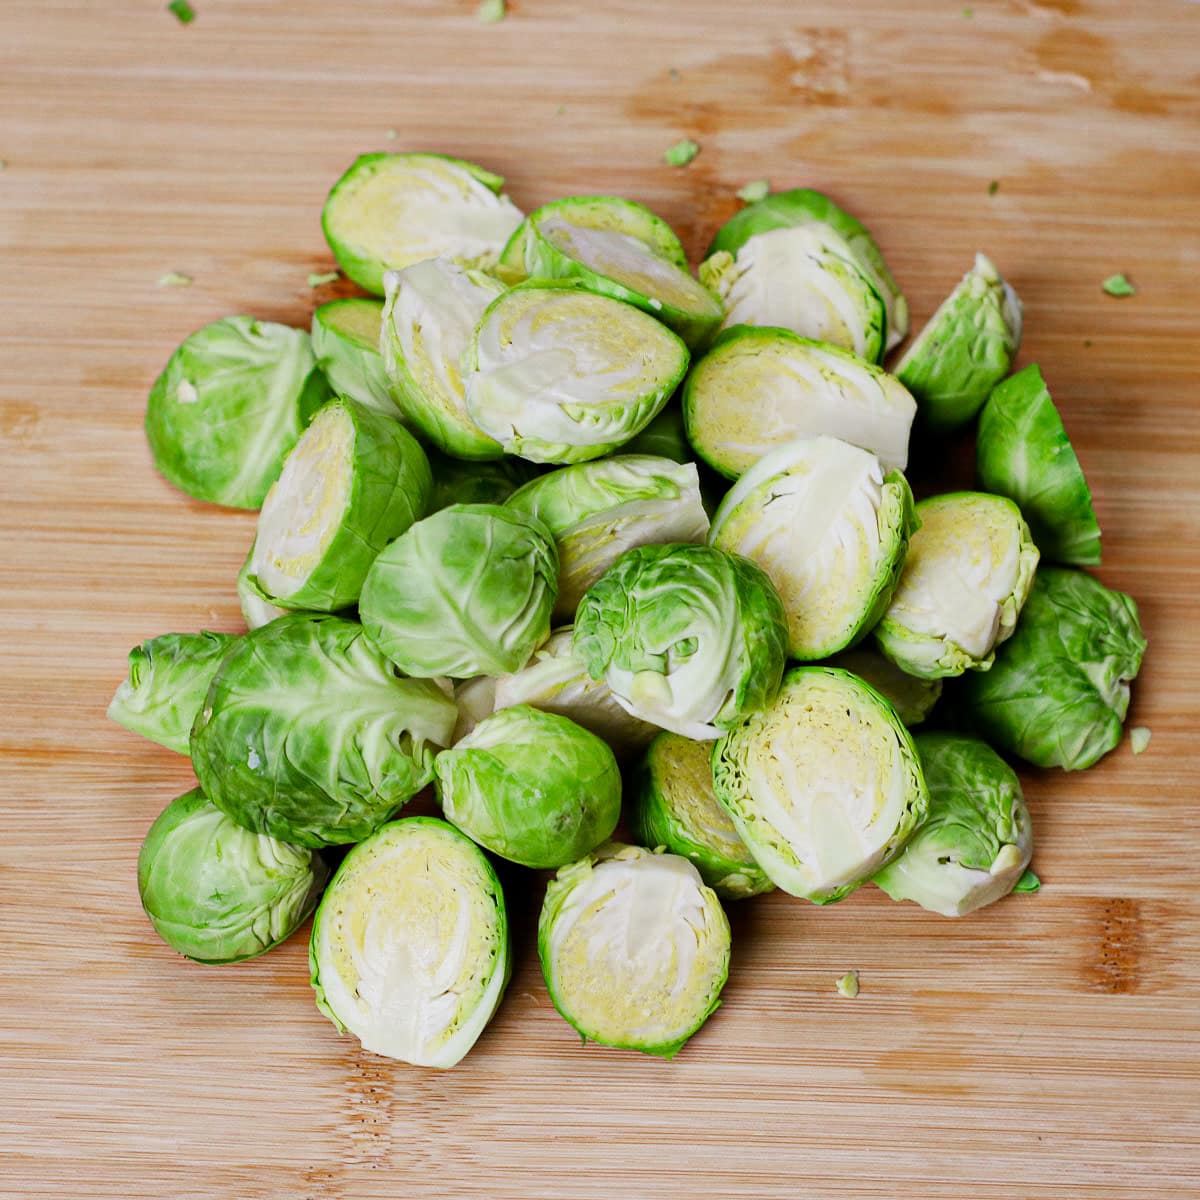 Halved Brussels sprouts